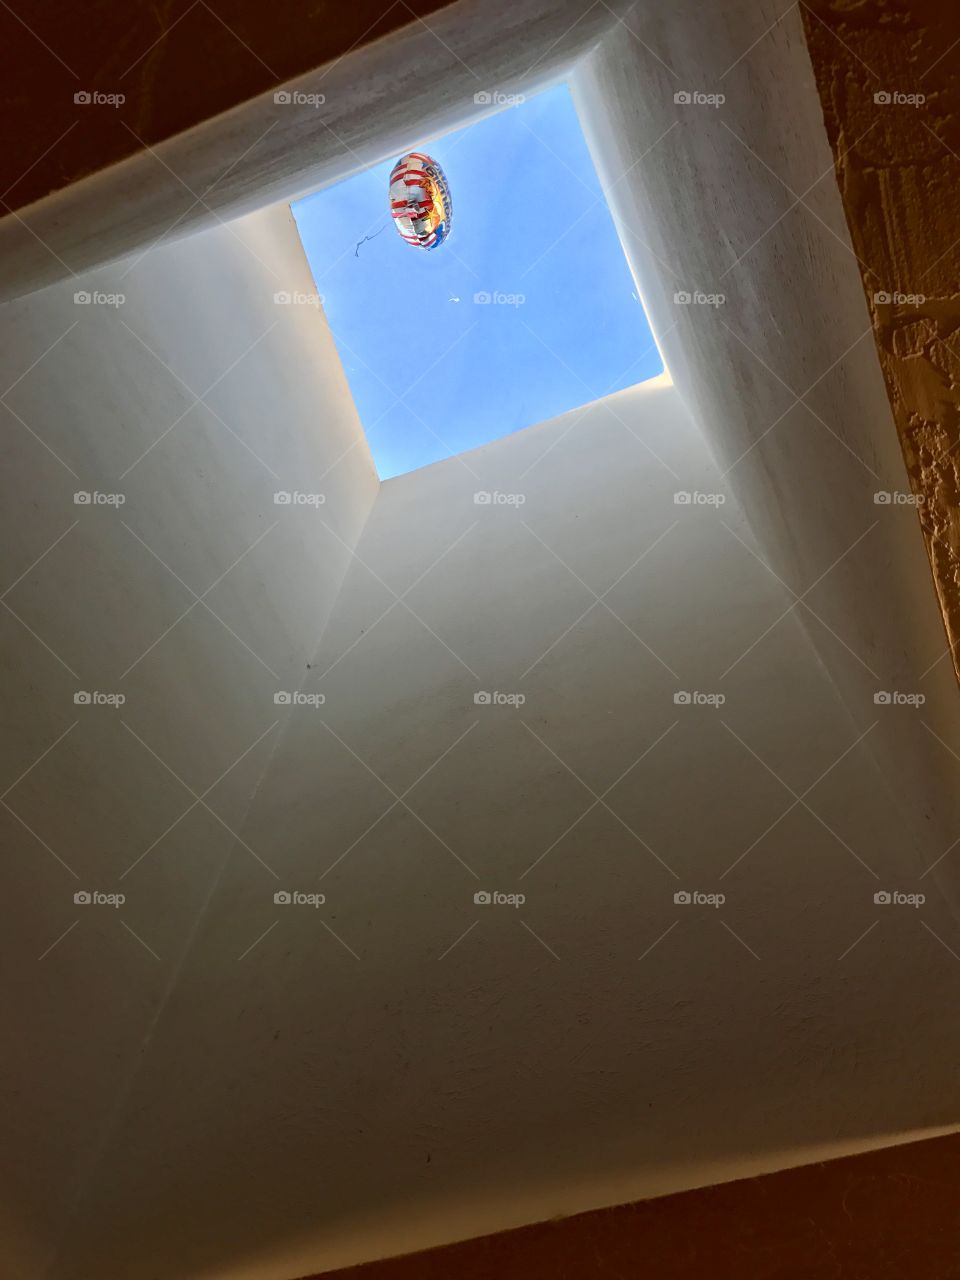 My son’s balloon escaped to the skylight